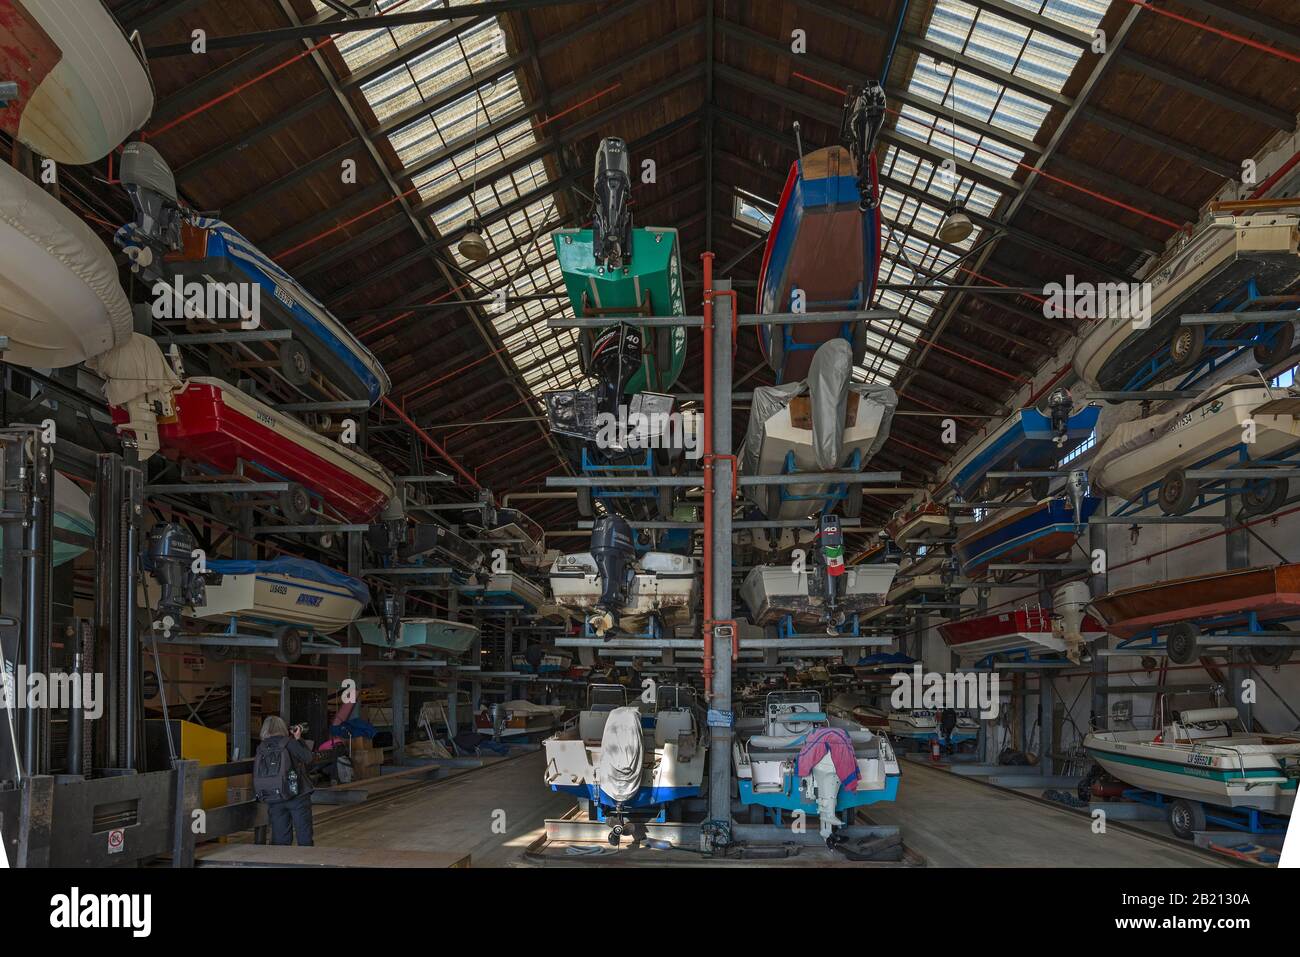 Warehouse for motorboats in a port on the island of Guidecca, Venice, Veneto, Italy Stock Photo